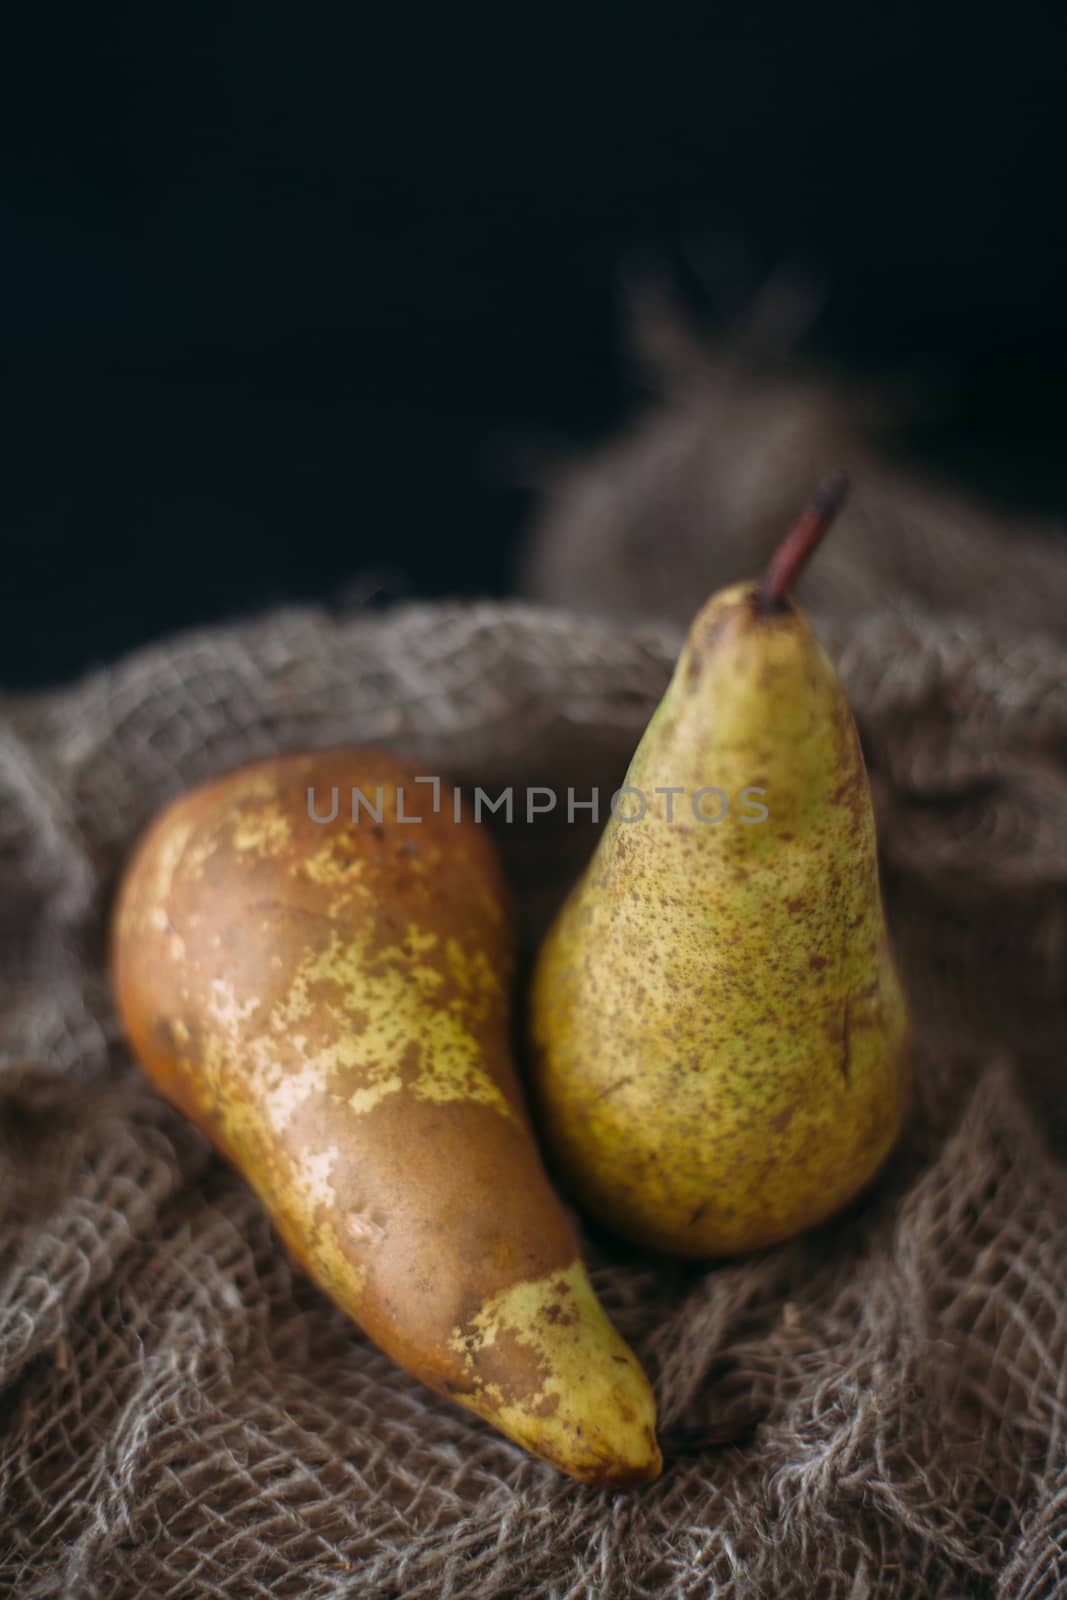 Still life with pears on burlap on a dark wooden photo. Pears Co by Opikanets